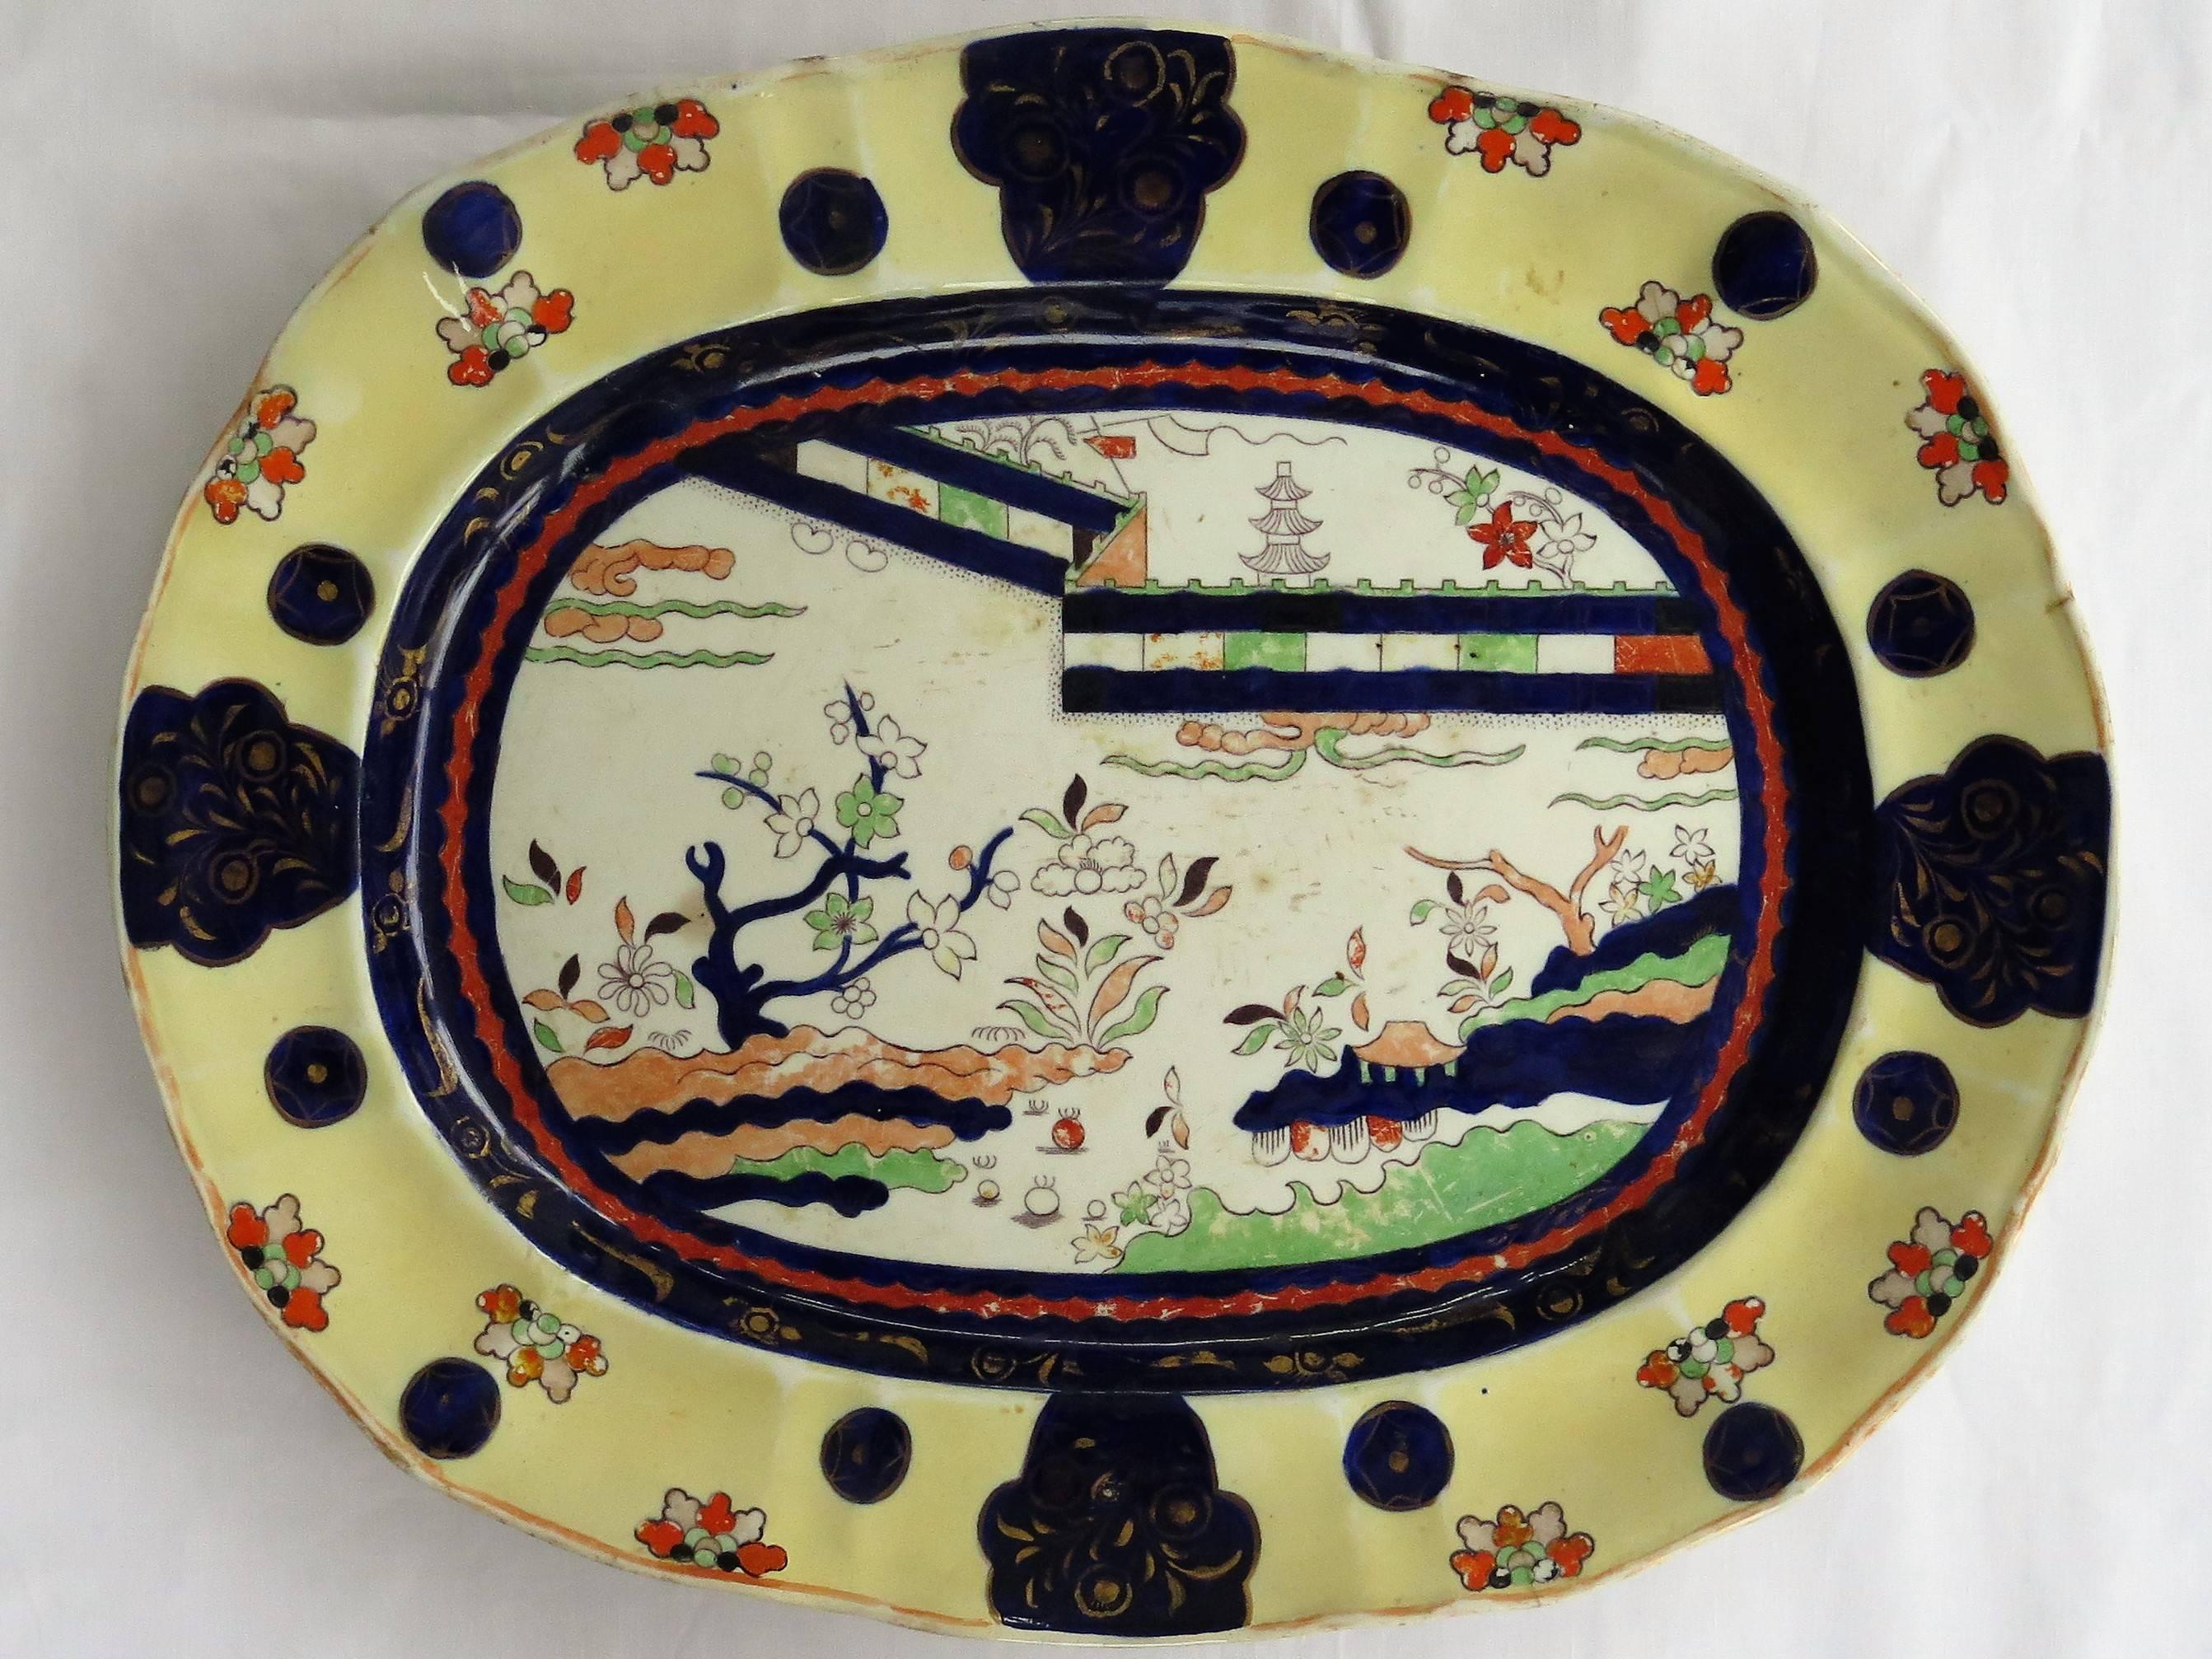 This is a very large mid-19th century Mason's ironstone Platter in the documented colored wall pattern, made in the mid-19th century, circa 1840. 

This large meat platter is decorated in a very bold chinoiserie pattern called the 